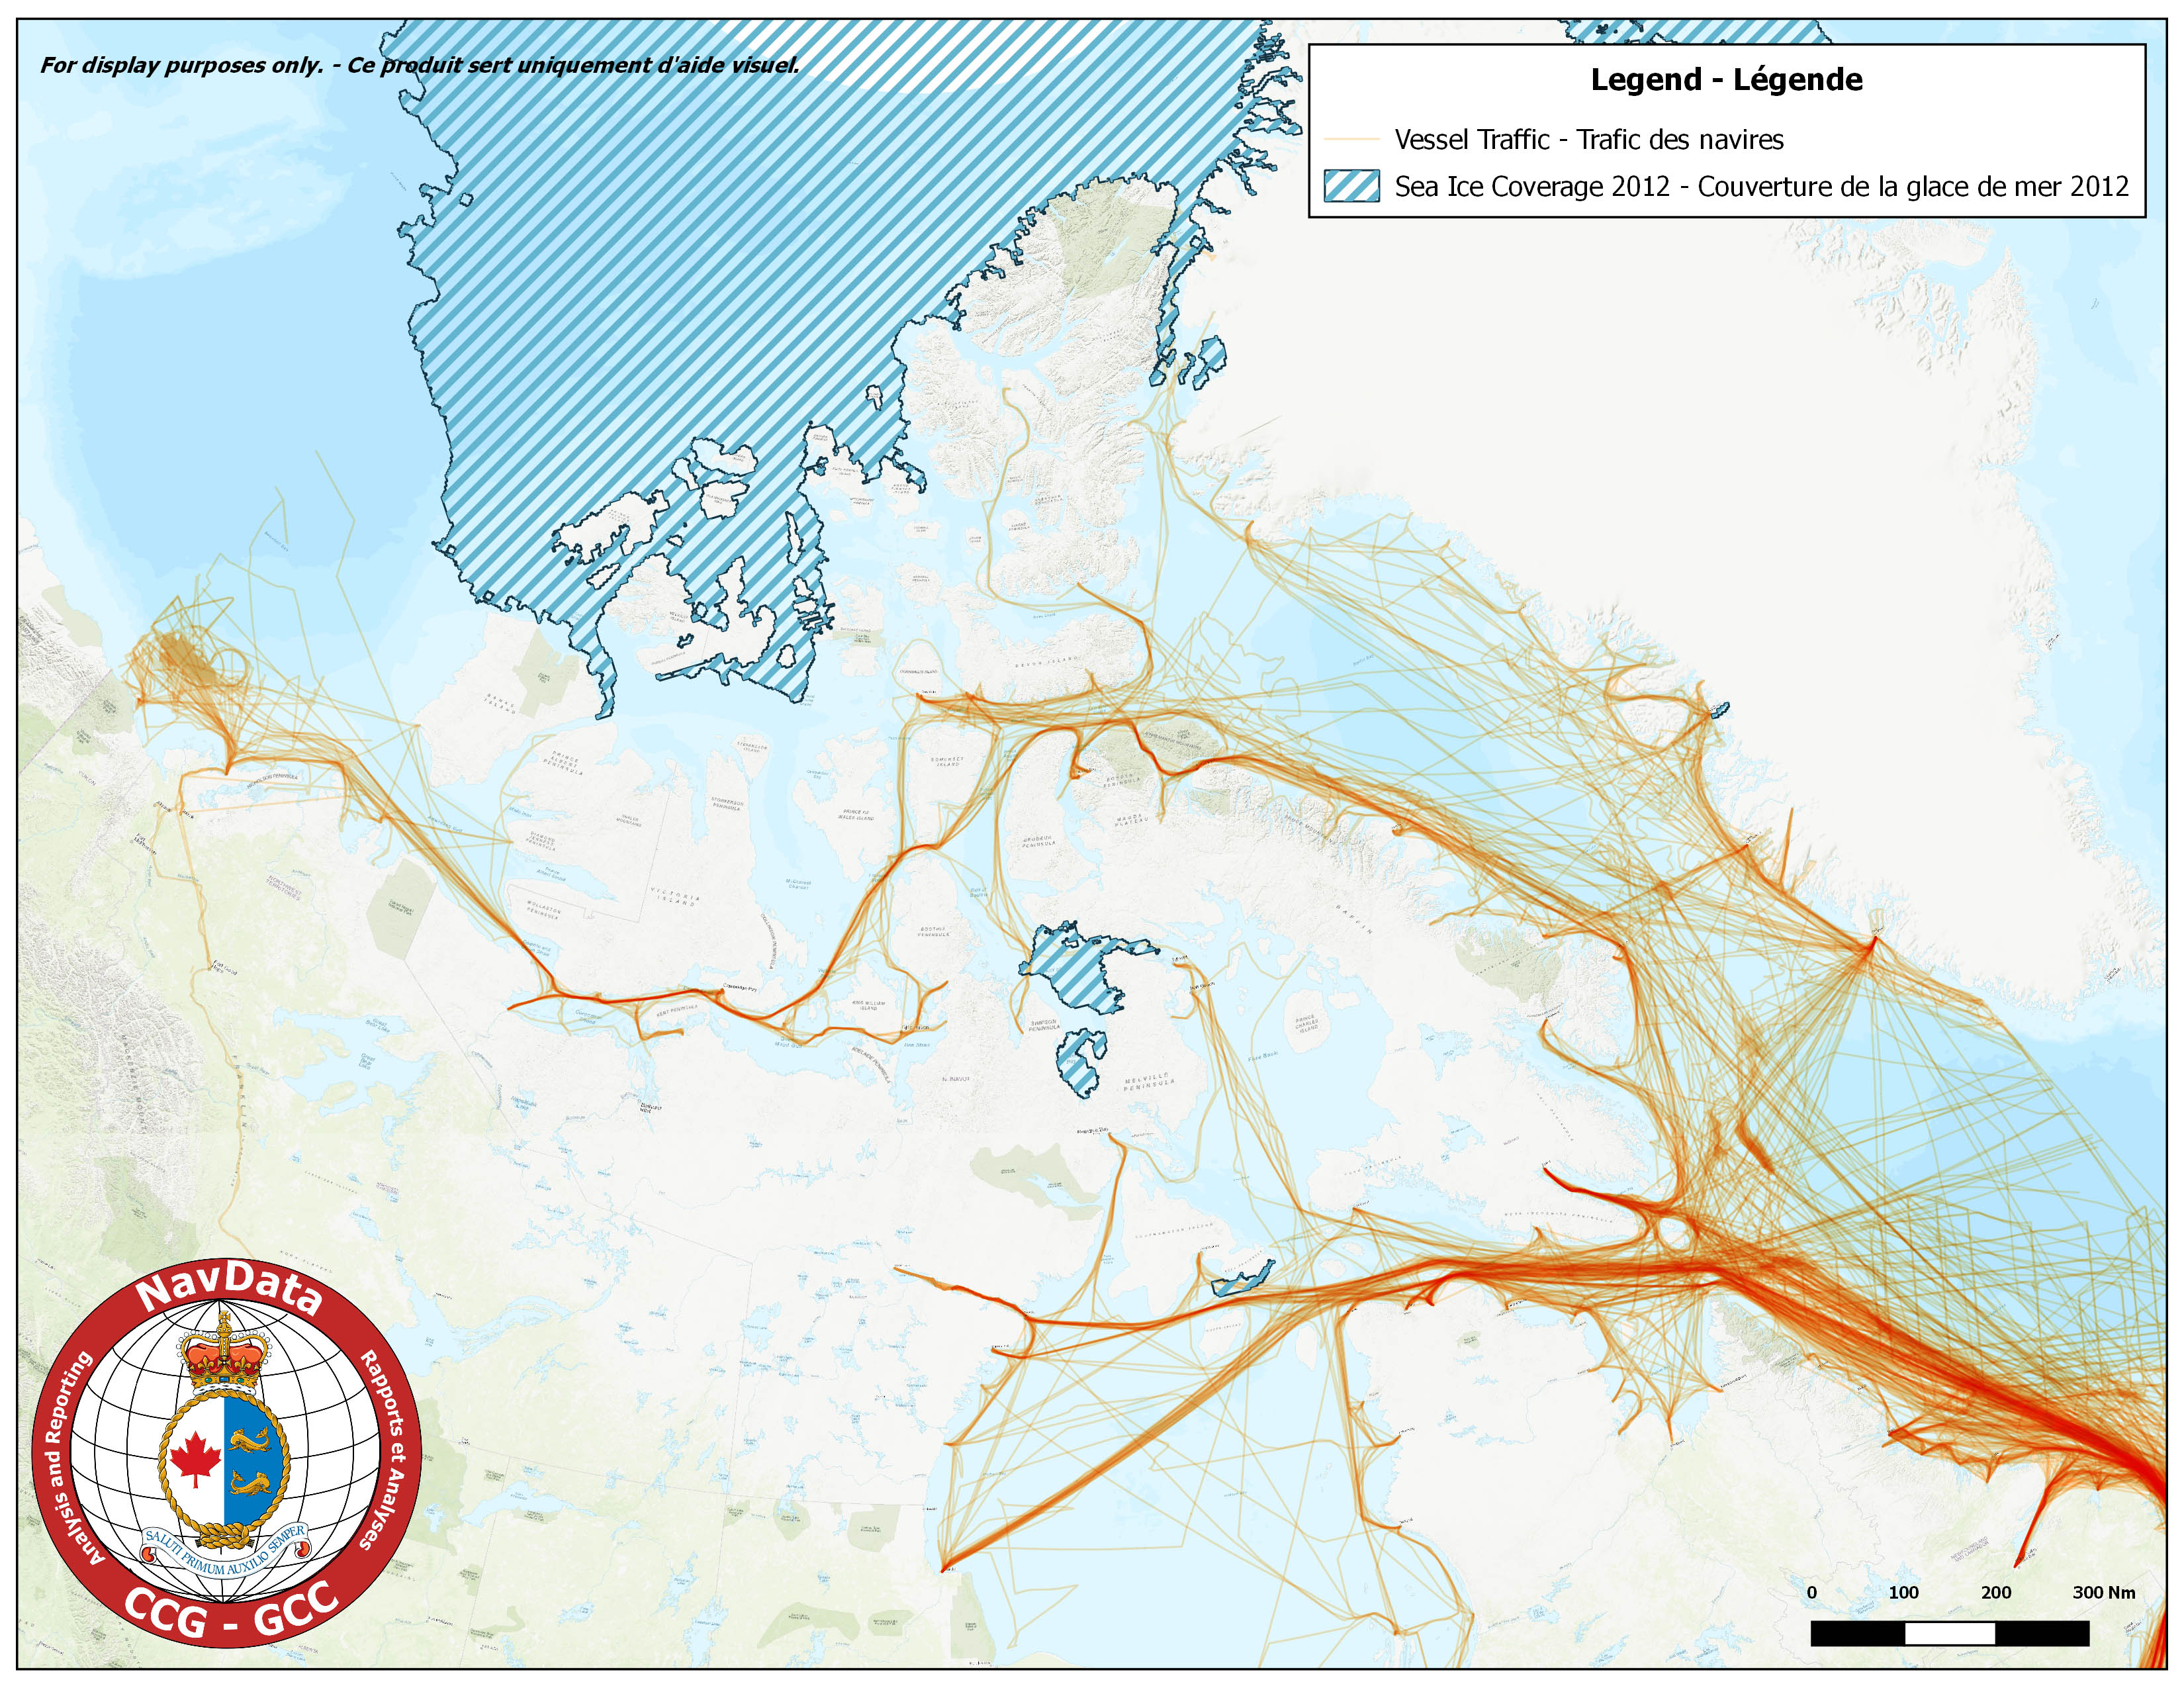 Map showing Arctic traffic density and maximum ice coverage for season of 2012